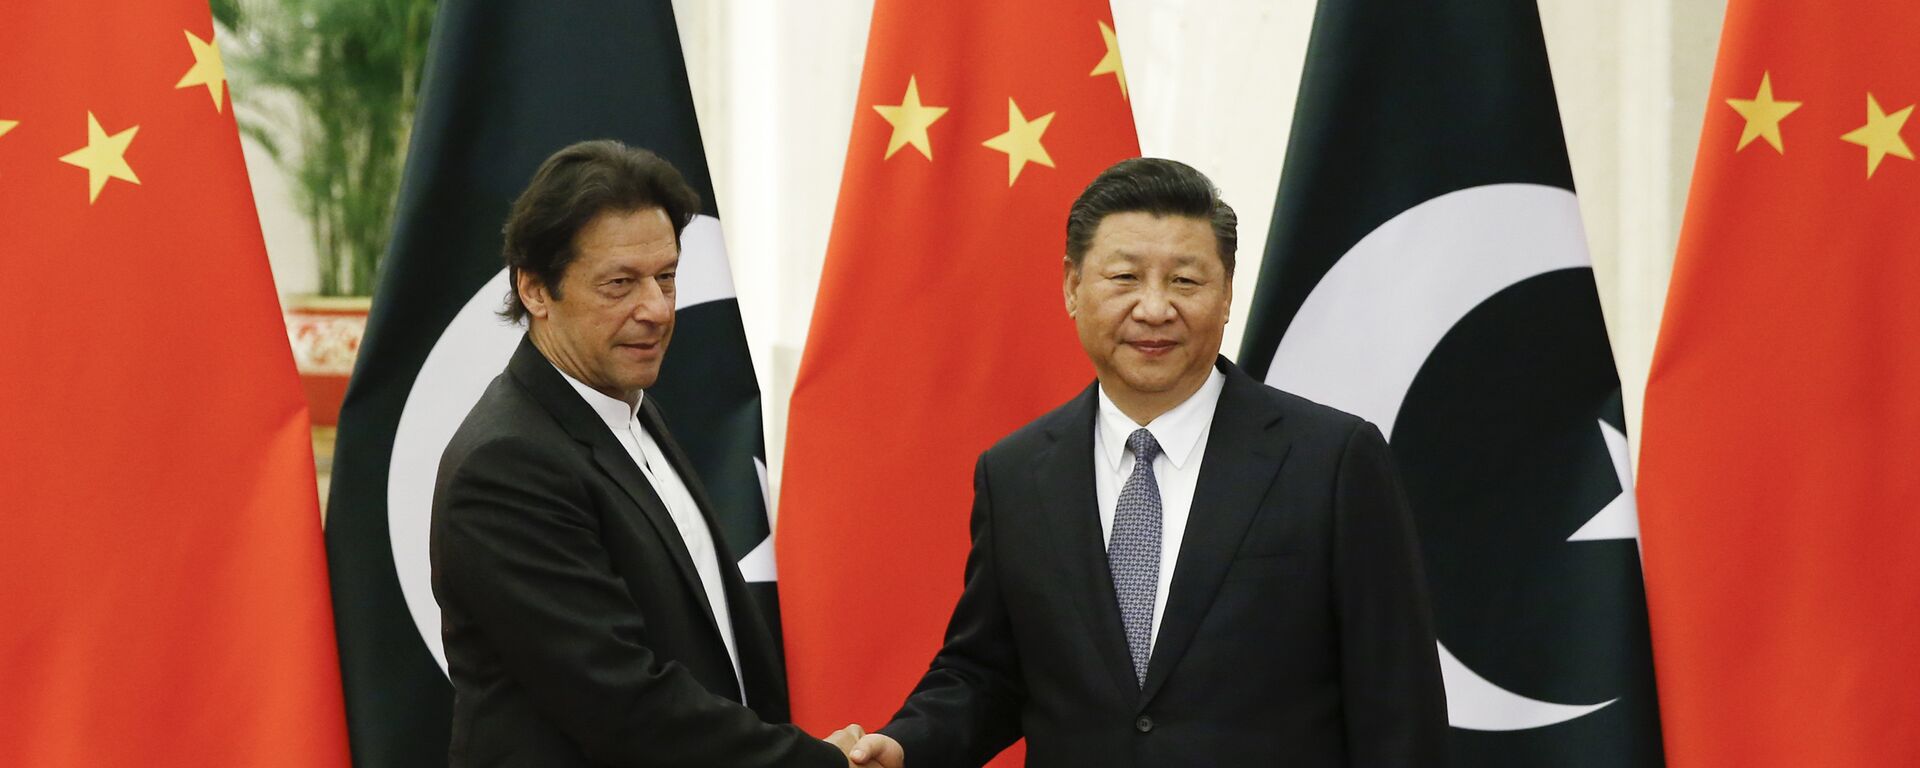 China's President Xi Jinping, right, meets Pakistan's Prime Minister Imran Khan at the Great Hall of the People in Beijing, Friday, Nov. 2, 2018 - Sputnik International, 1920, 04.06.2021